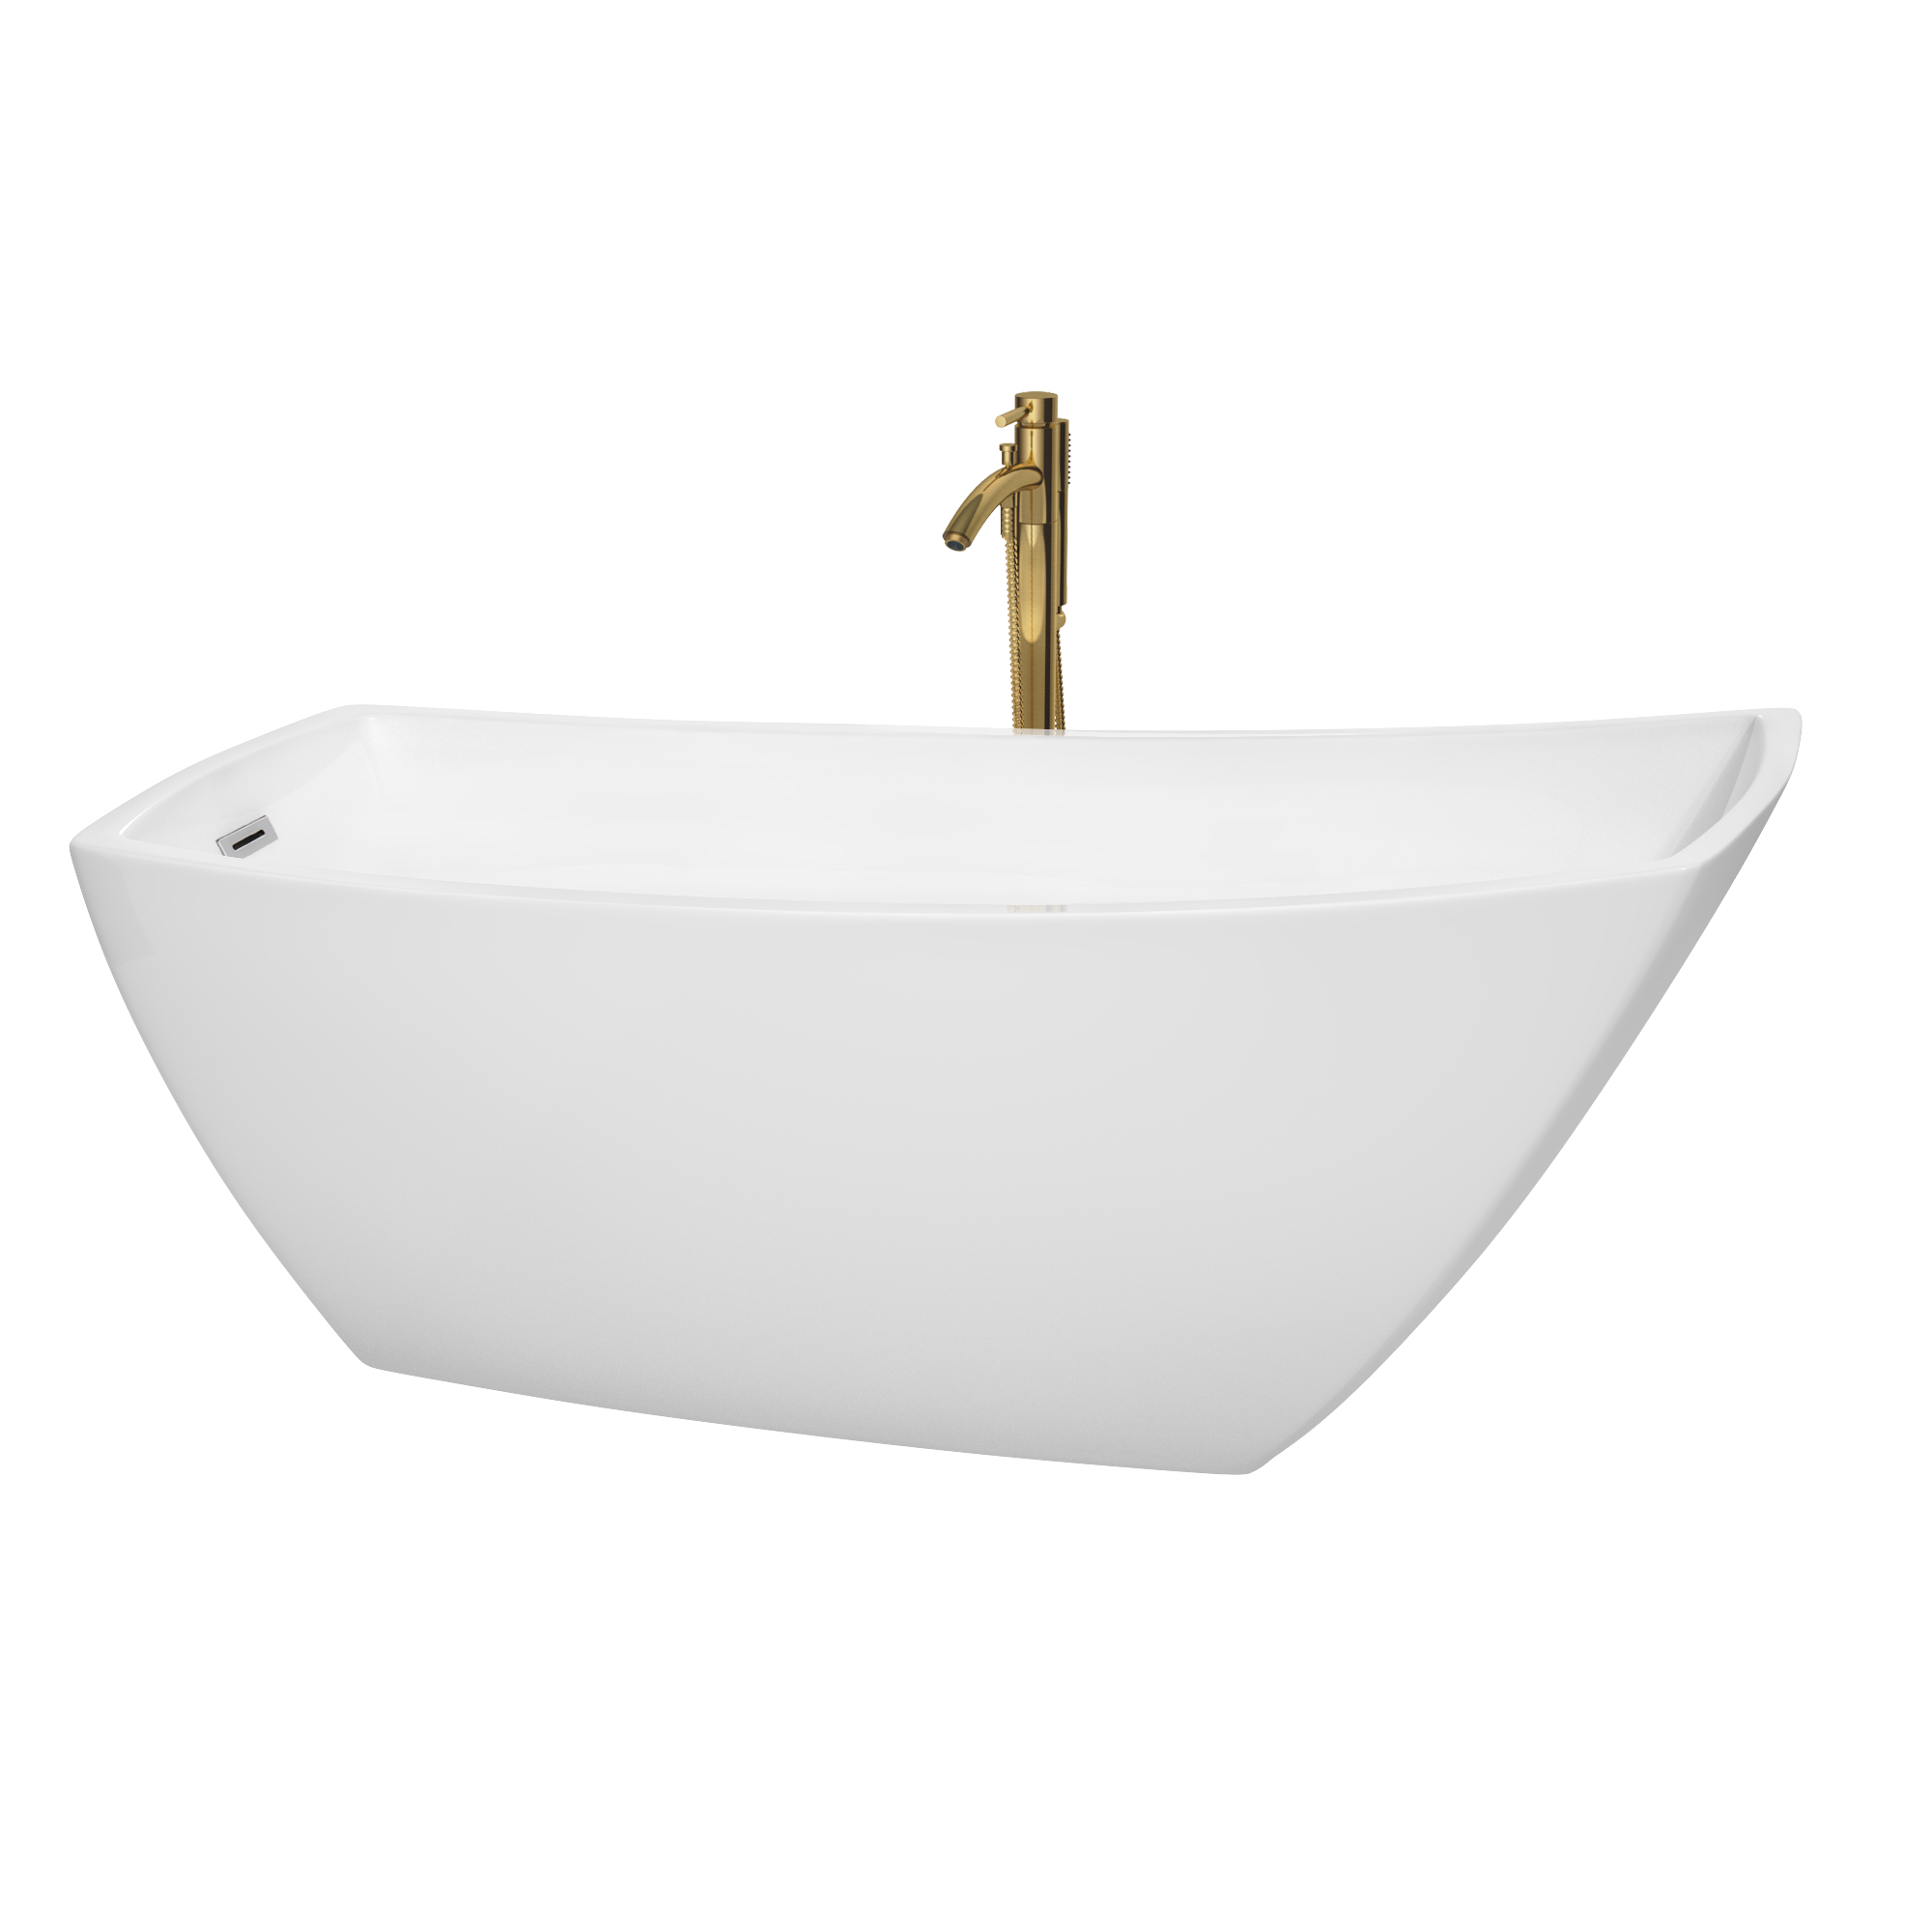 67" Freestanding Bathtub in White Finish with Polished Chrome Trim and Floor Mounted Faucet in Brushed Gold